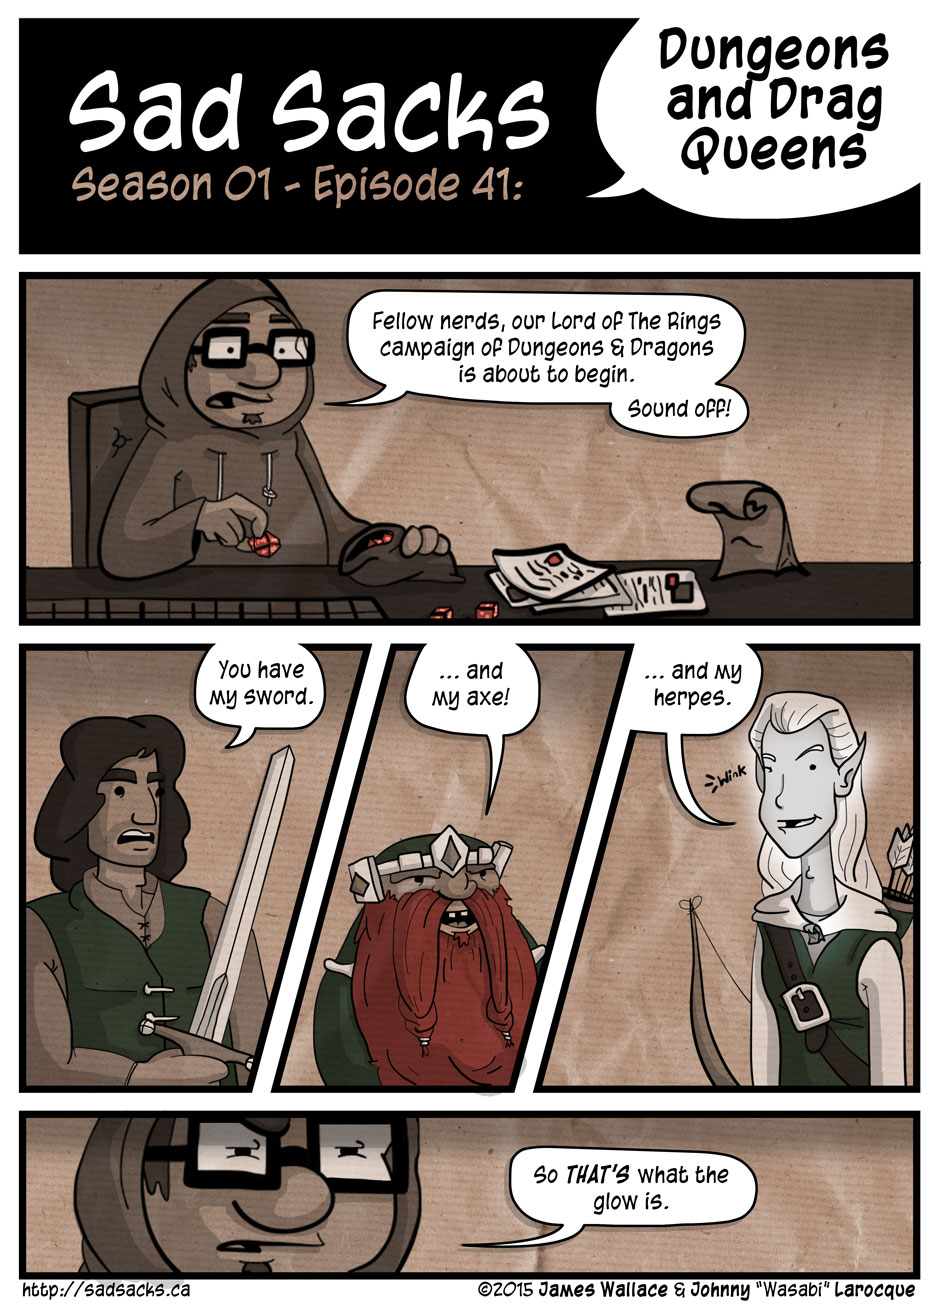 Sad Sacks s01e41: Dungeons and Drag Queens. LOTR edition.